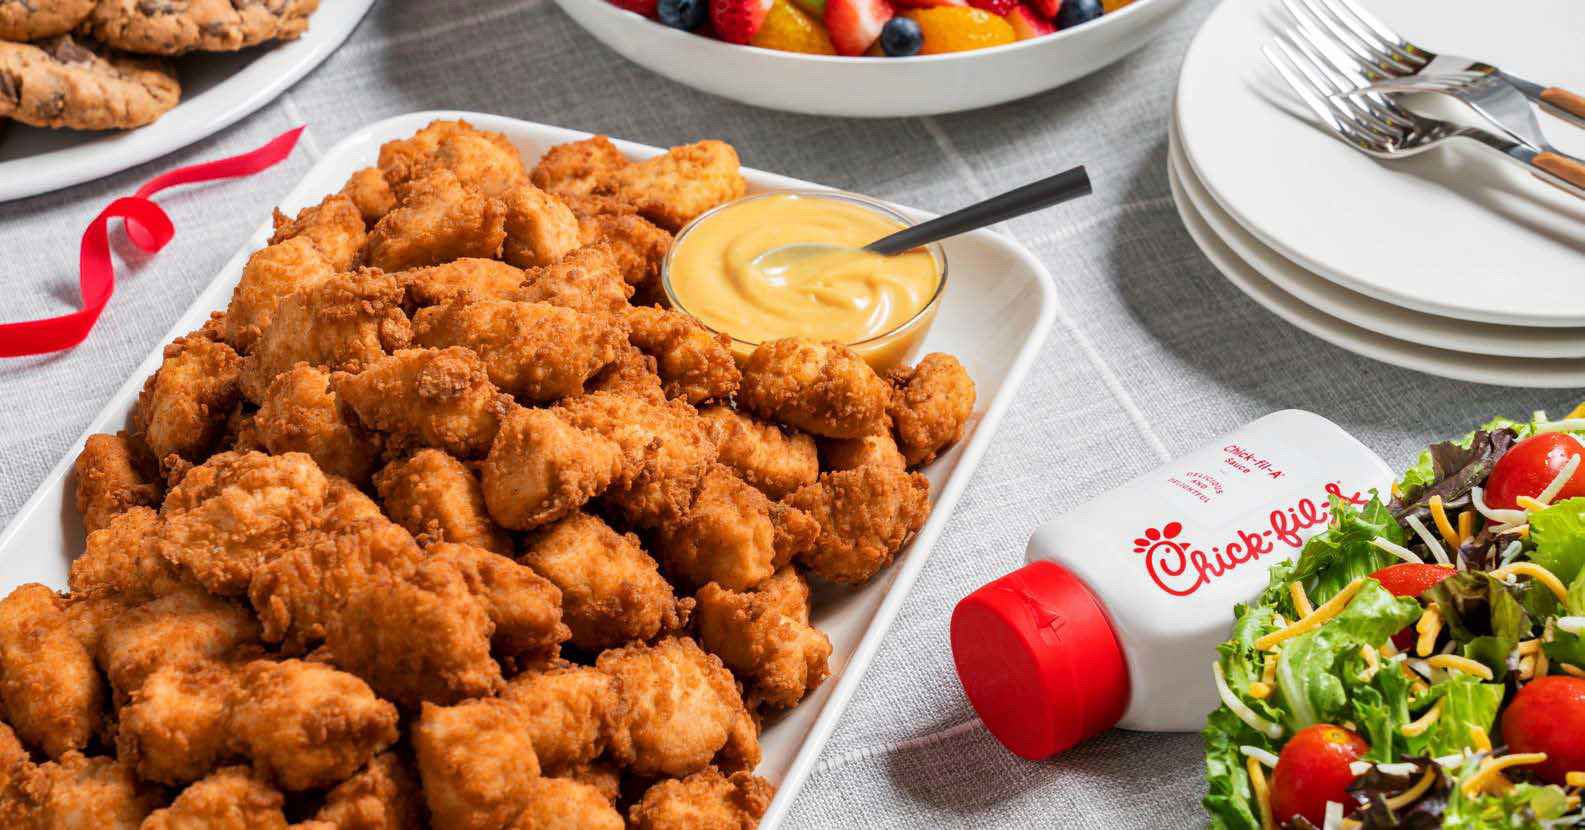 Free 5 ct Chick-fil-A® Nuggets